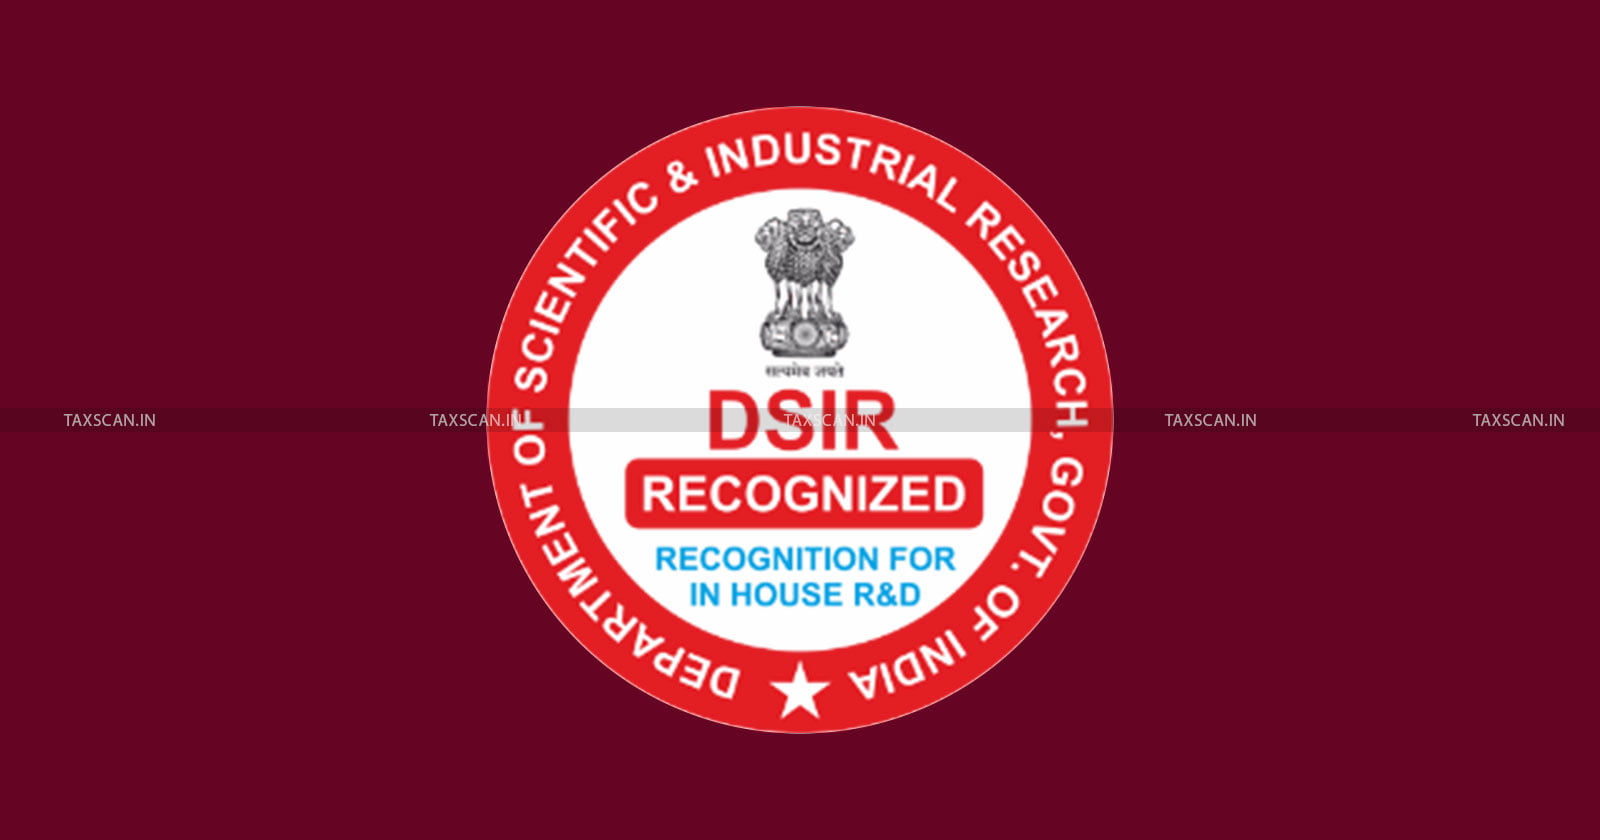 DSIR Registration is Sufficient to Claim Deduction - Cases Prior to Clause (b) Rule 6(7A) Amendment - ITAT - TAXSCAN